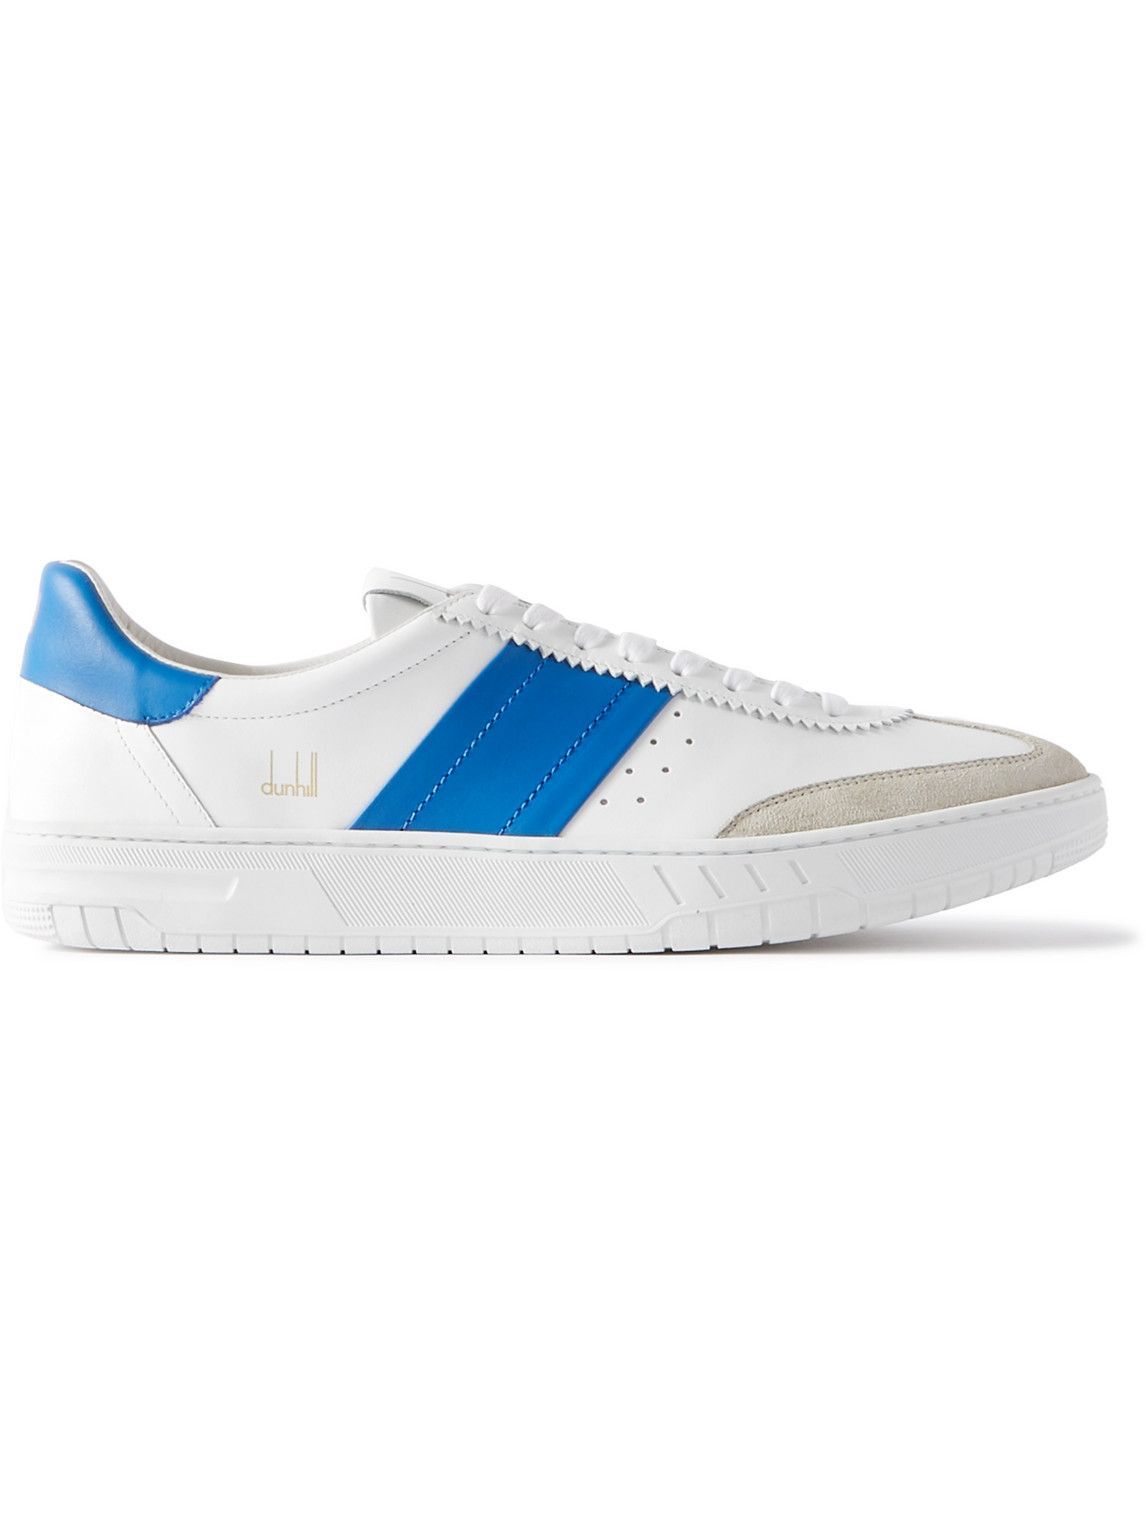 Dunhill - Court Legacy Leather and Suede Sneakers - White Dunhill